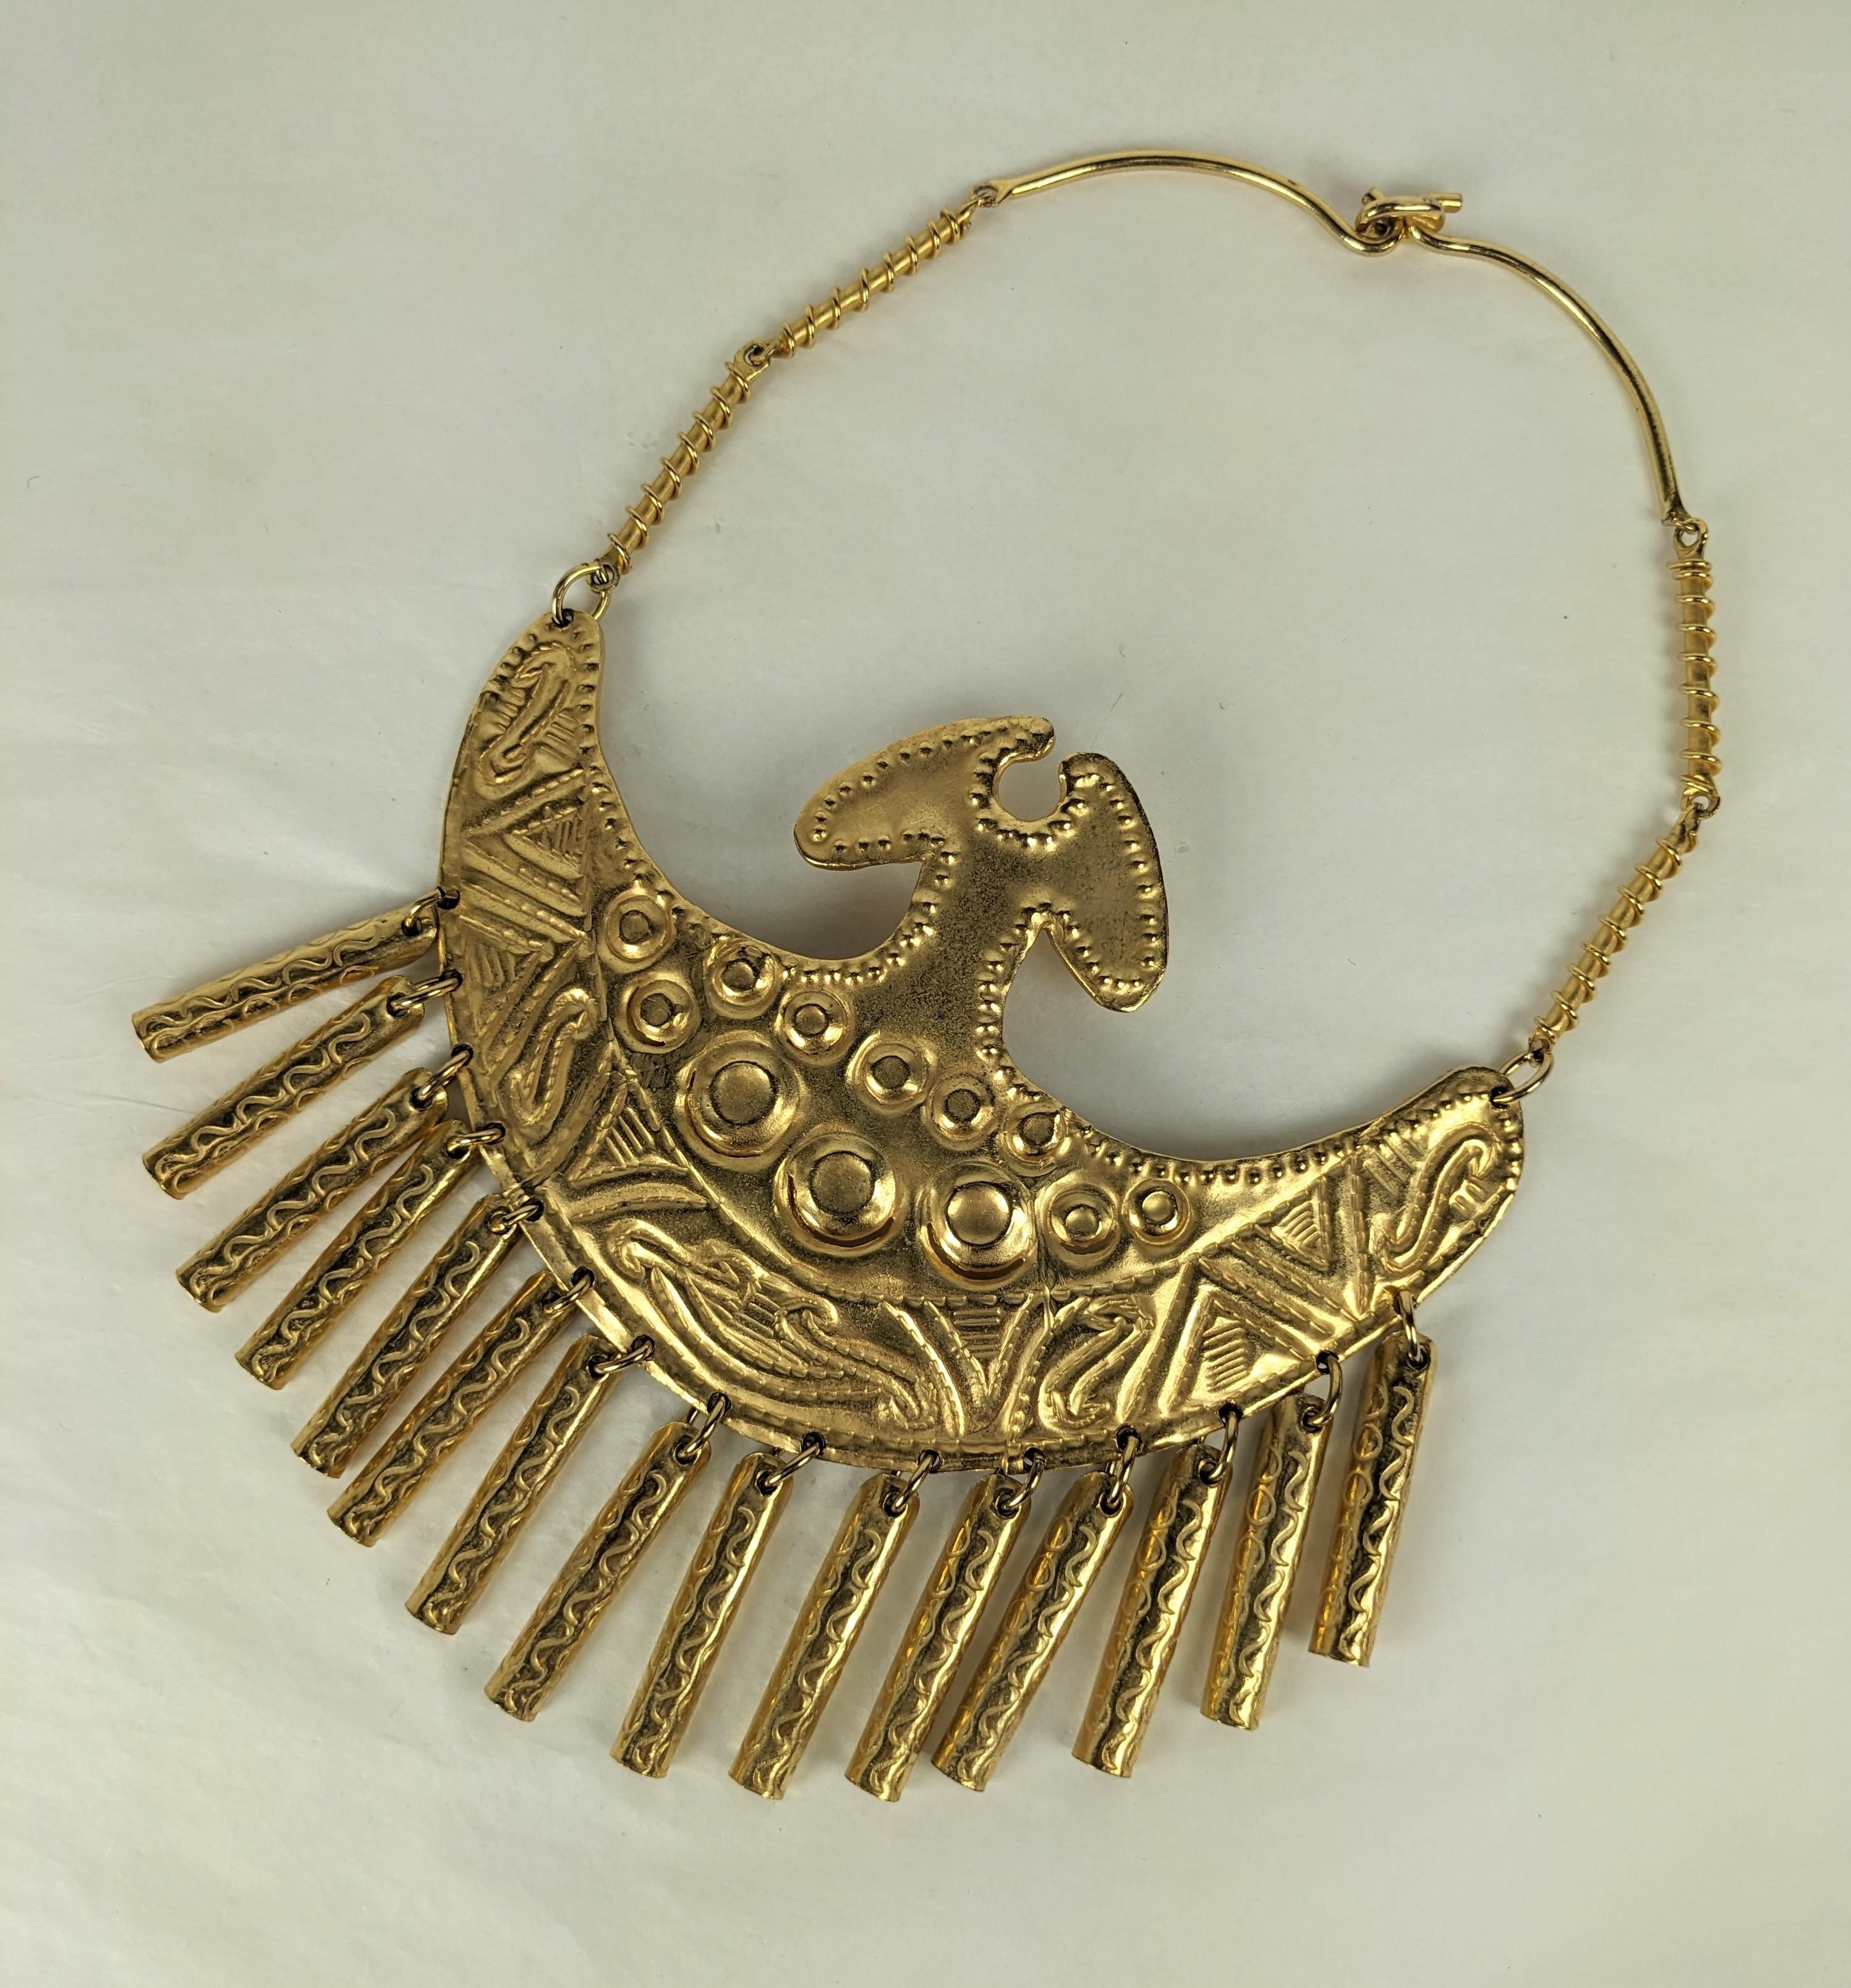 Massive Gilt Breast Plate Necklace from the 1960's. Based on an ethnic design with etched drops along the lower edge. Chain of wire wrapped rods with hook closure, unsigned but likely by Alexis Kirk. Amazing scale perfect for caftan or simple